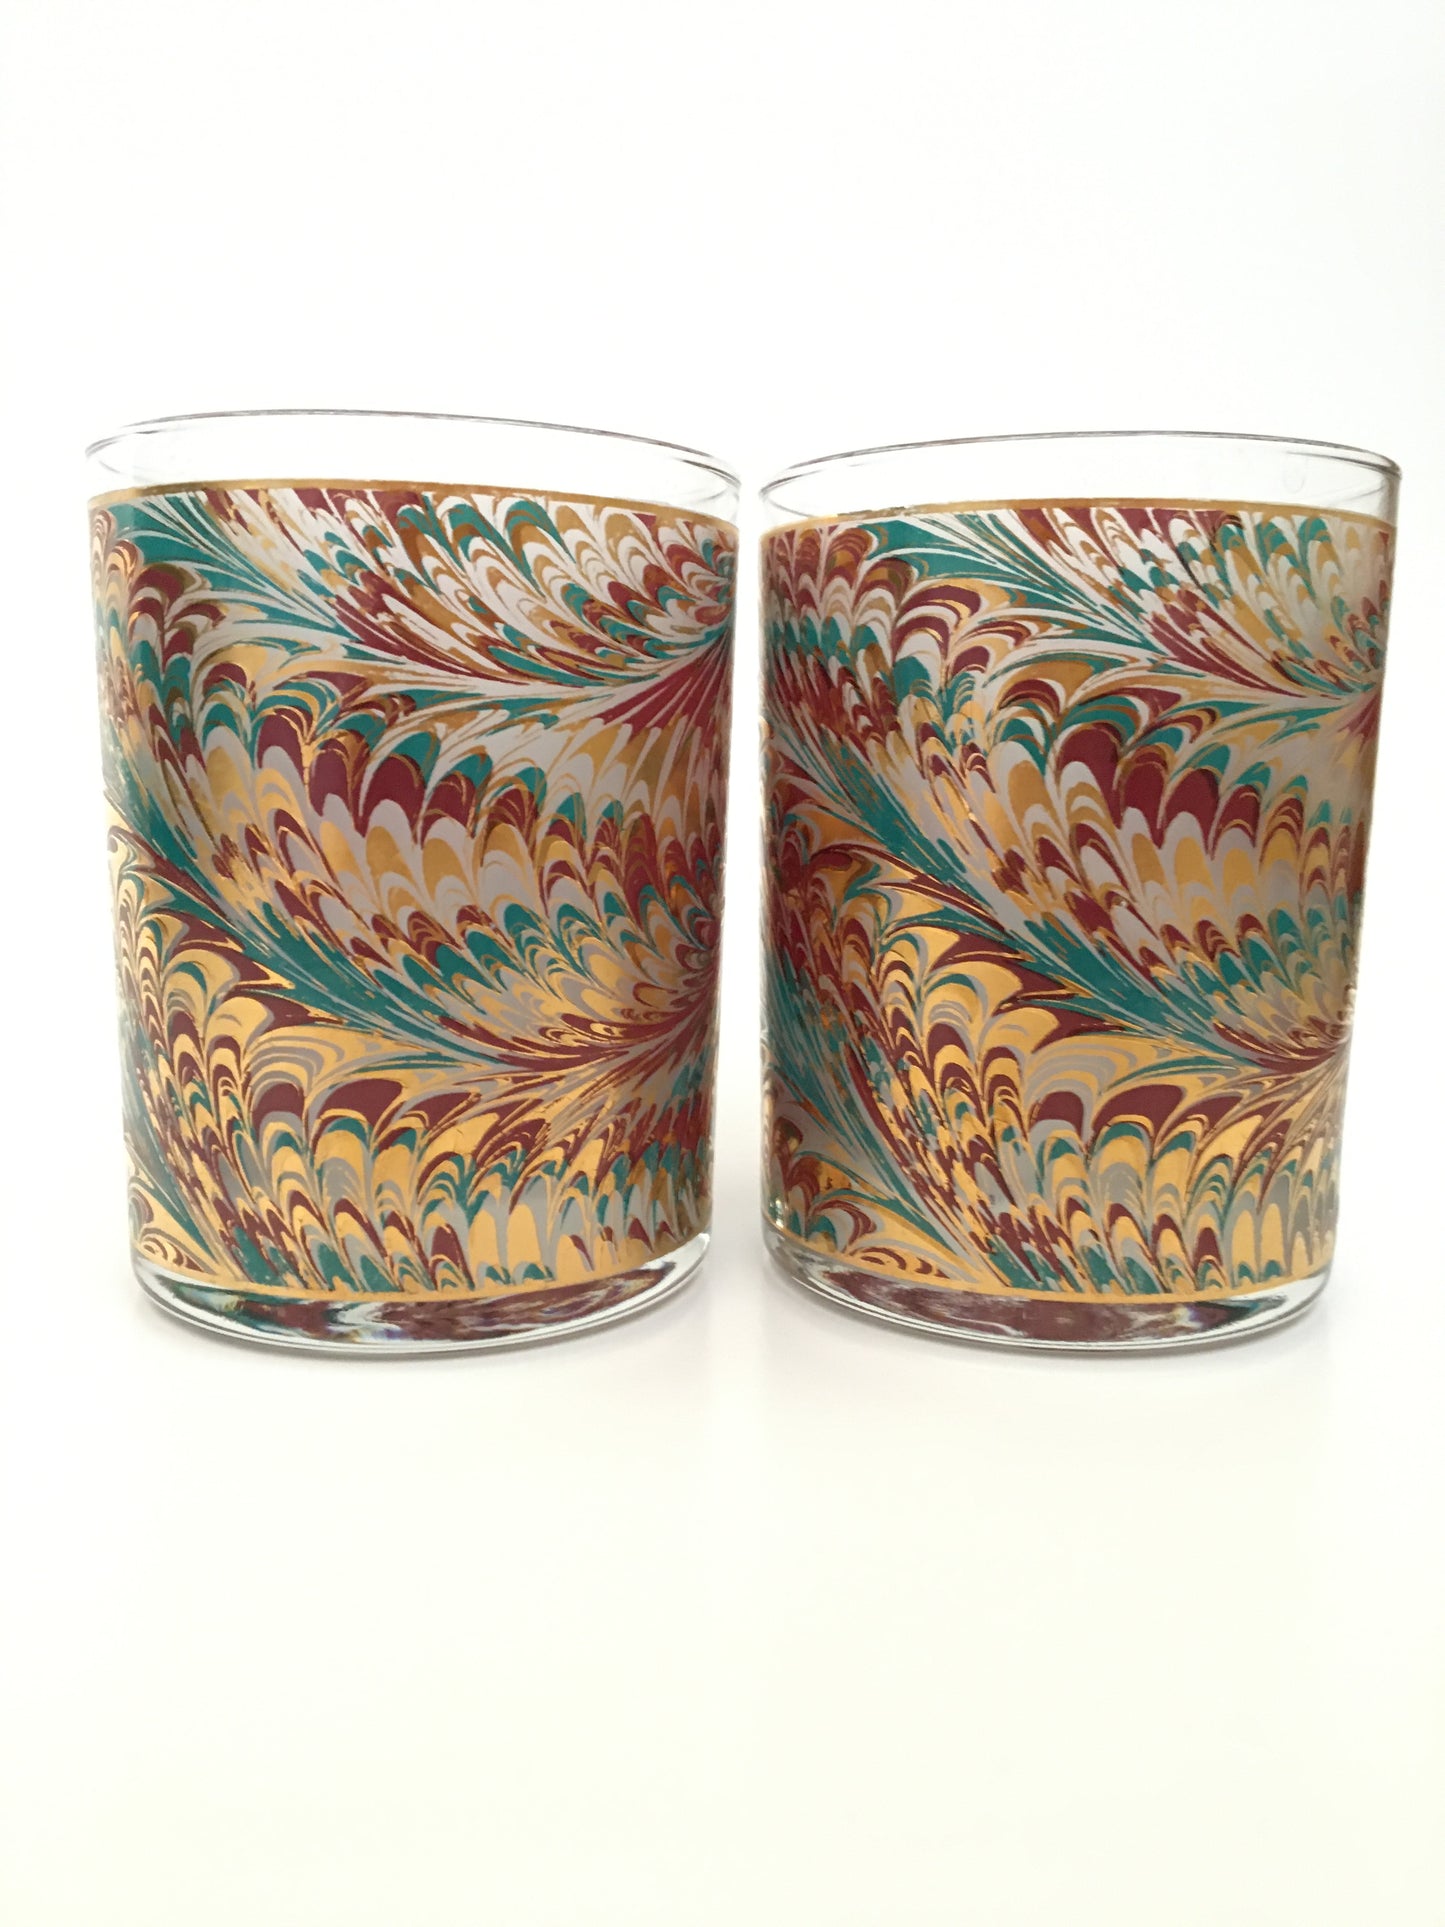 Culver Teal/Red Marble Executive On the Rocks (Pair)